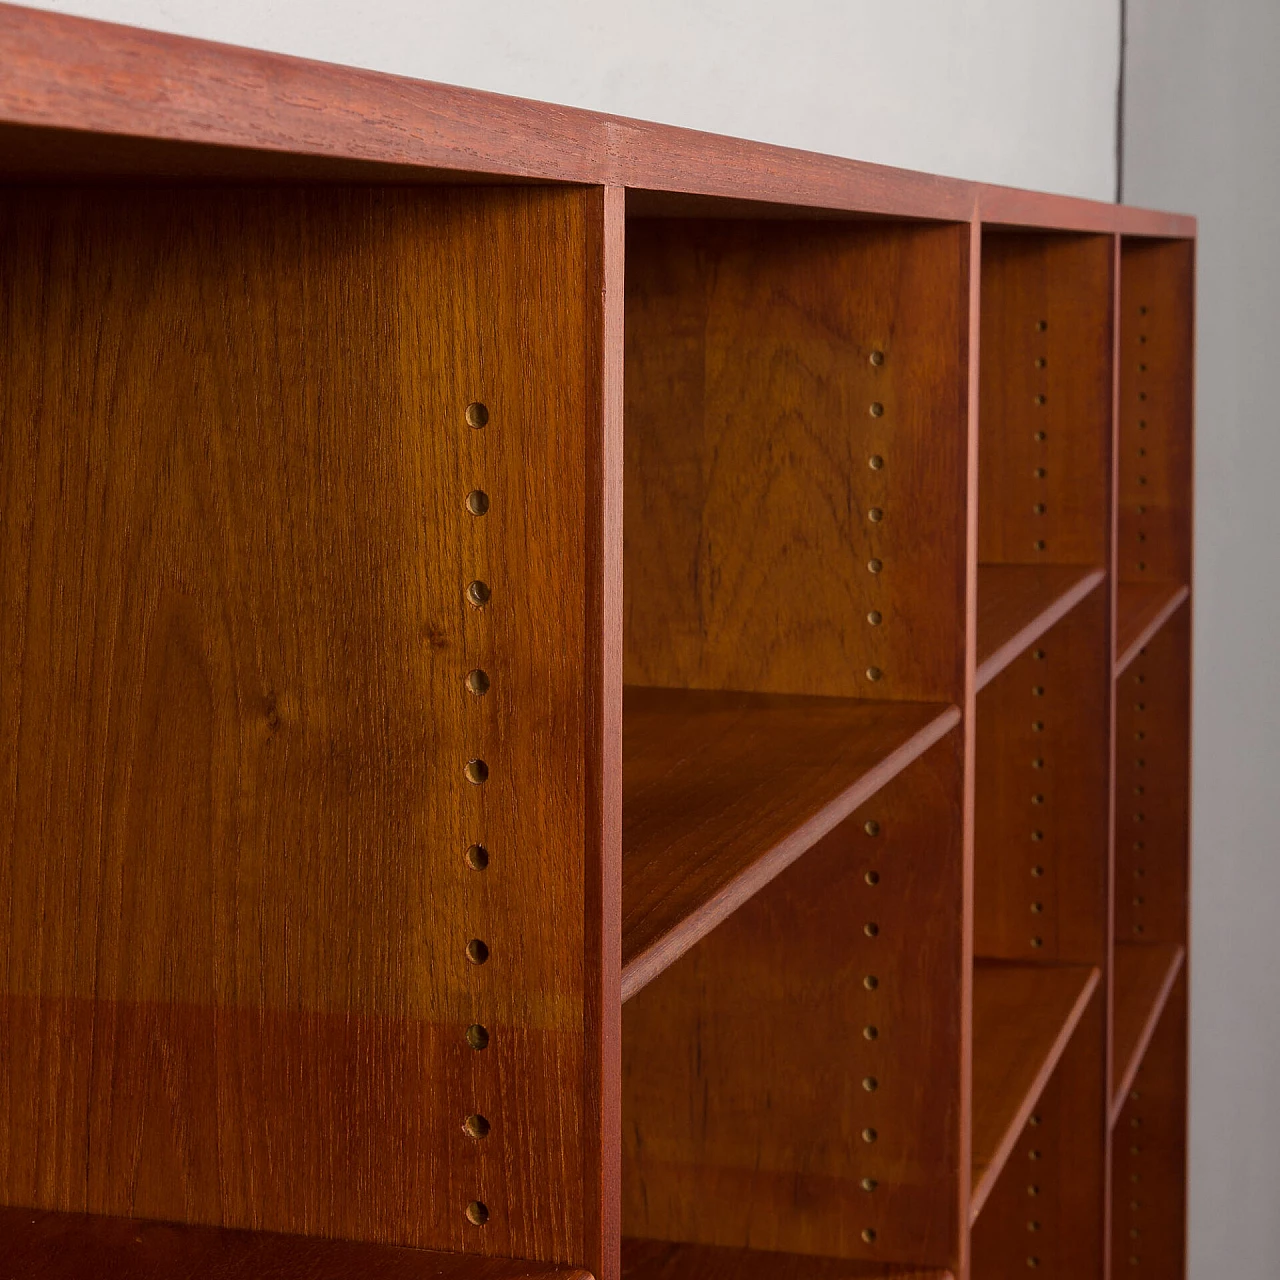 China bookcase by Børge Mogensen for C. M. Madsen, 1960s 11